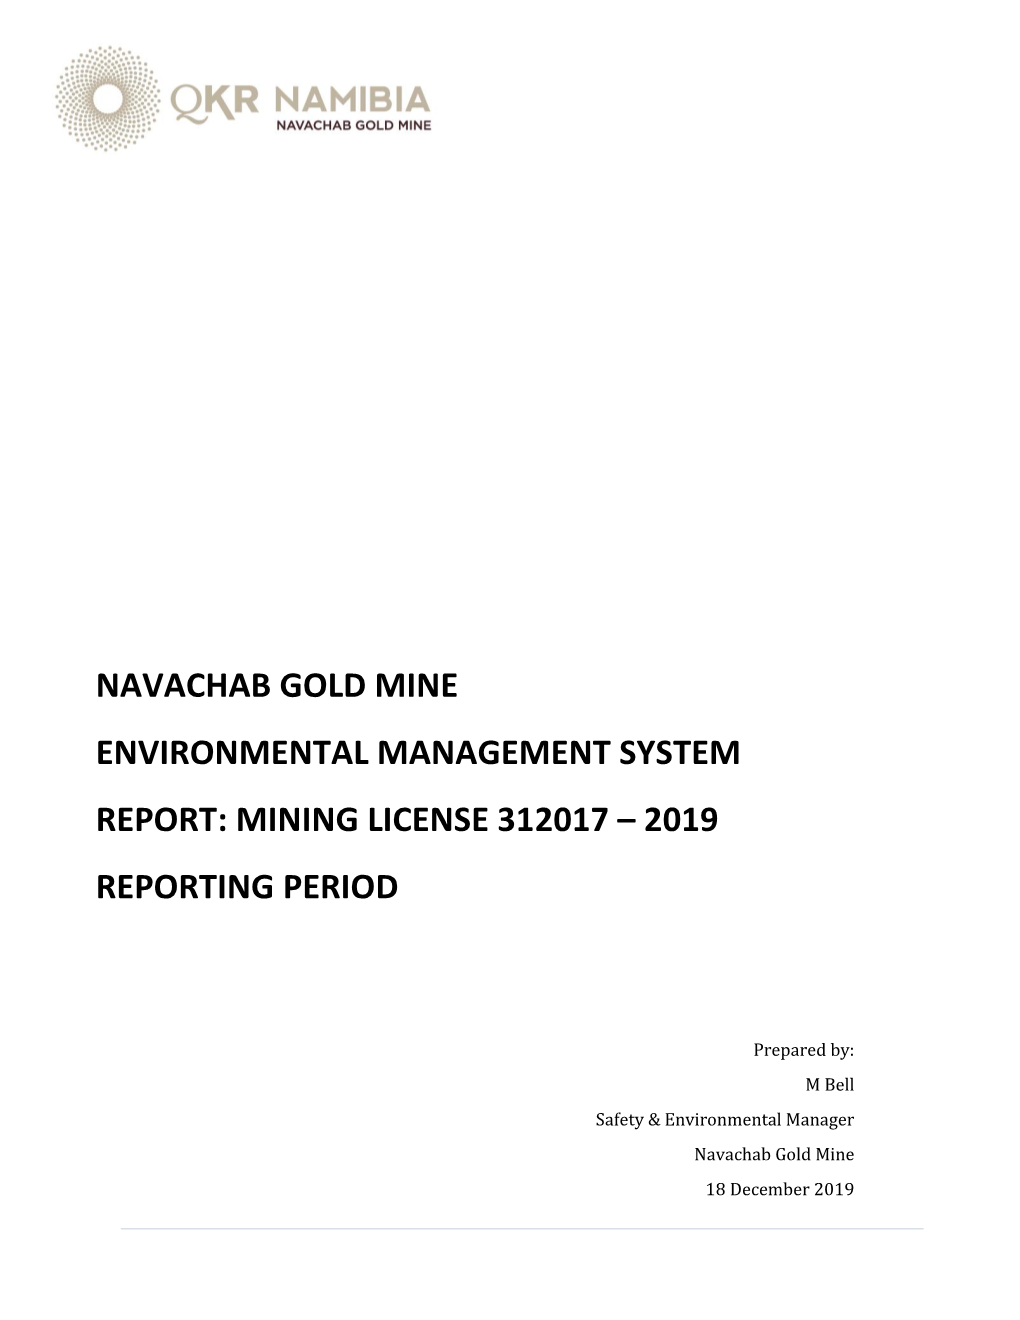 Navachab Gold Mine Environmental Management System Report: Mining License 312017 – 2019 Reporting Period